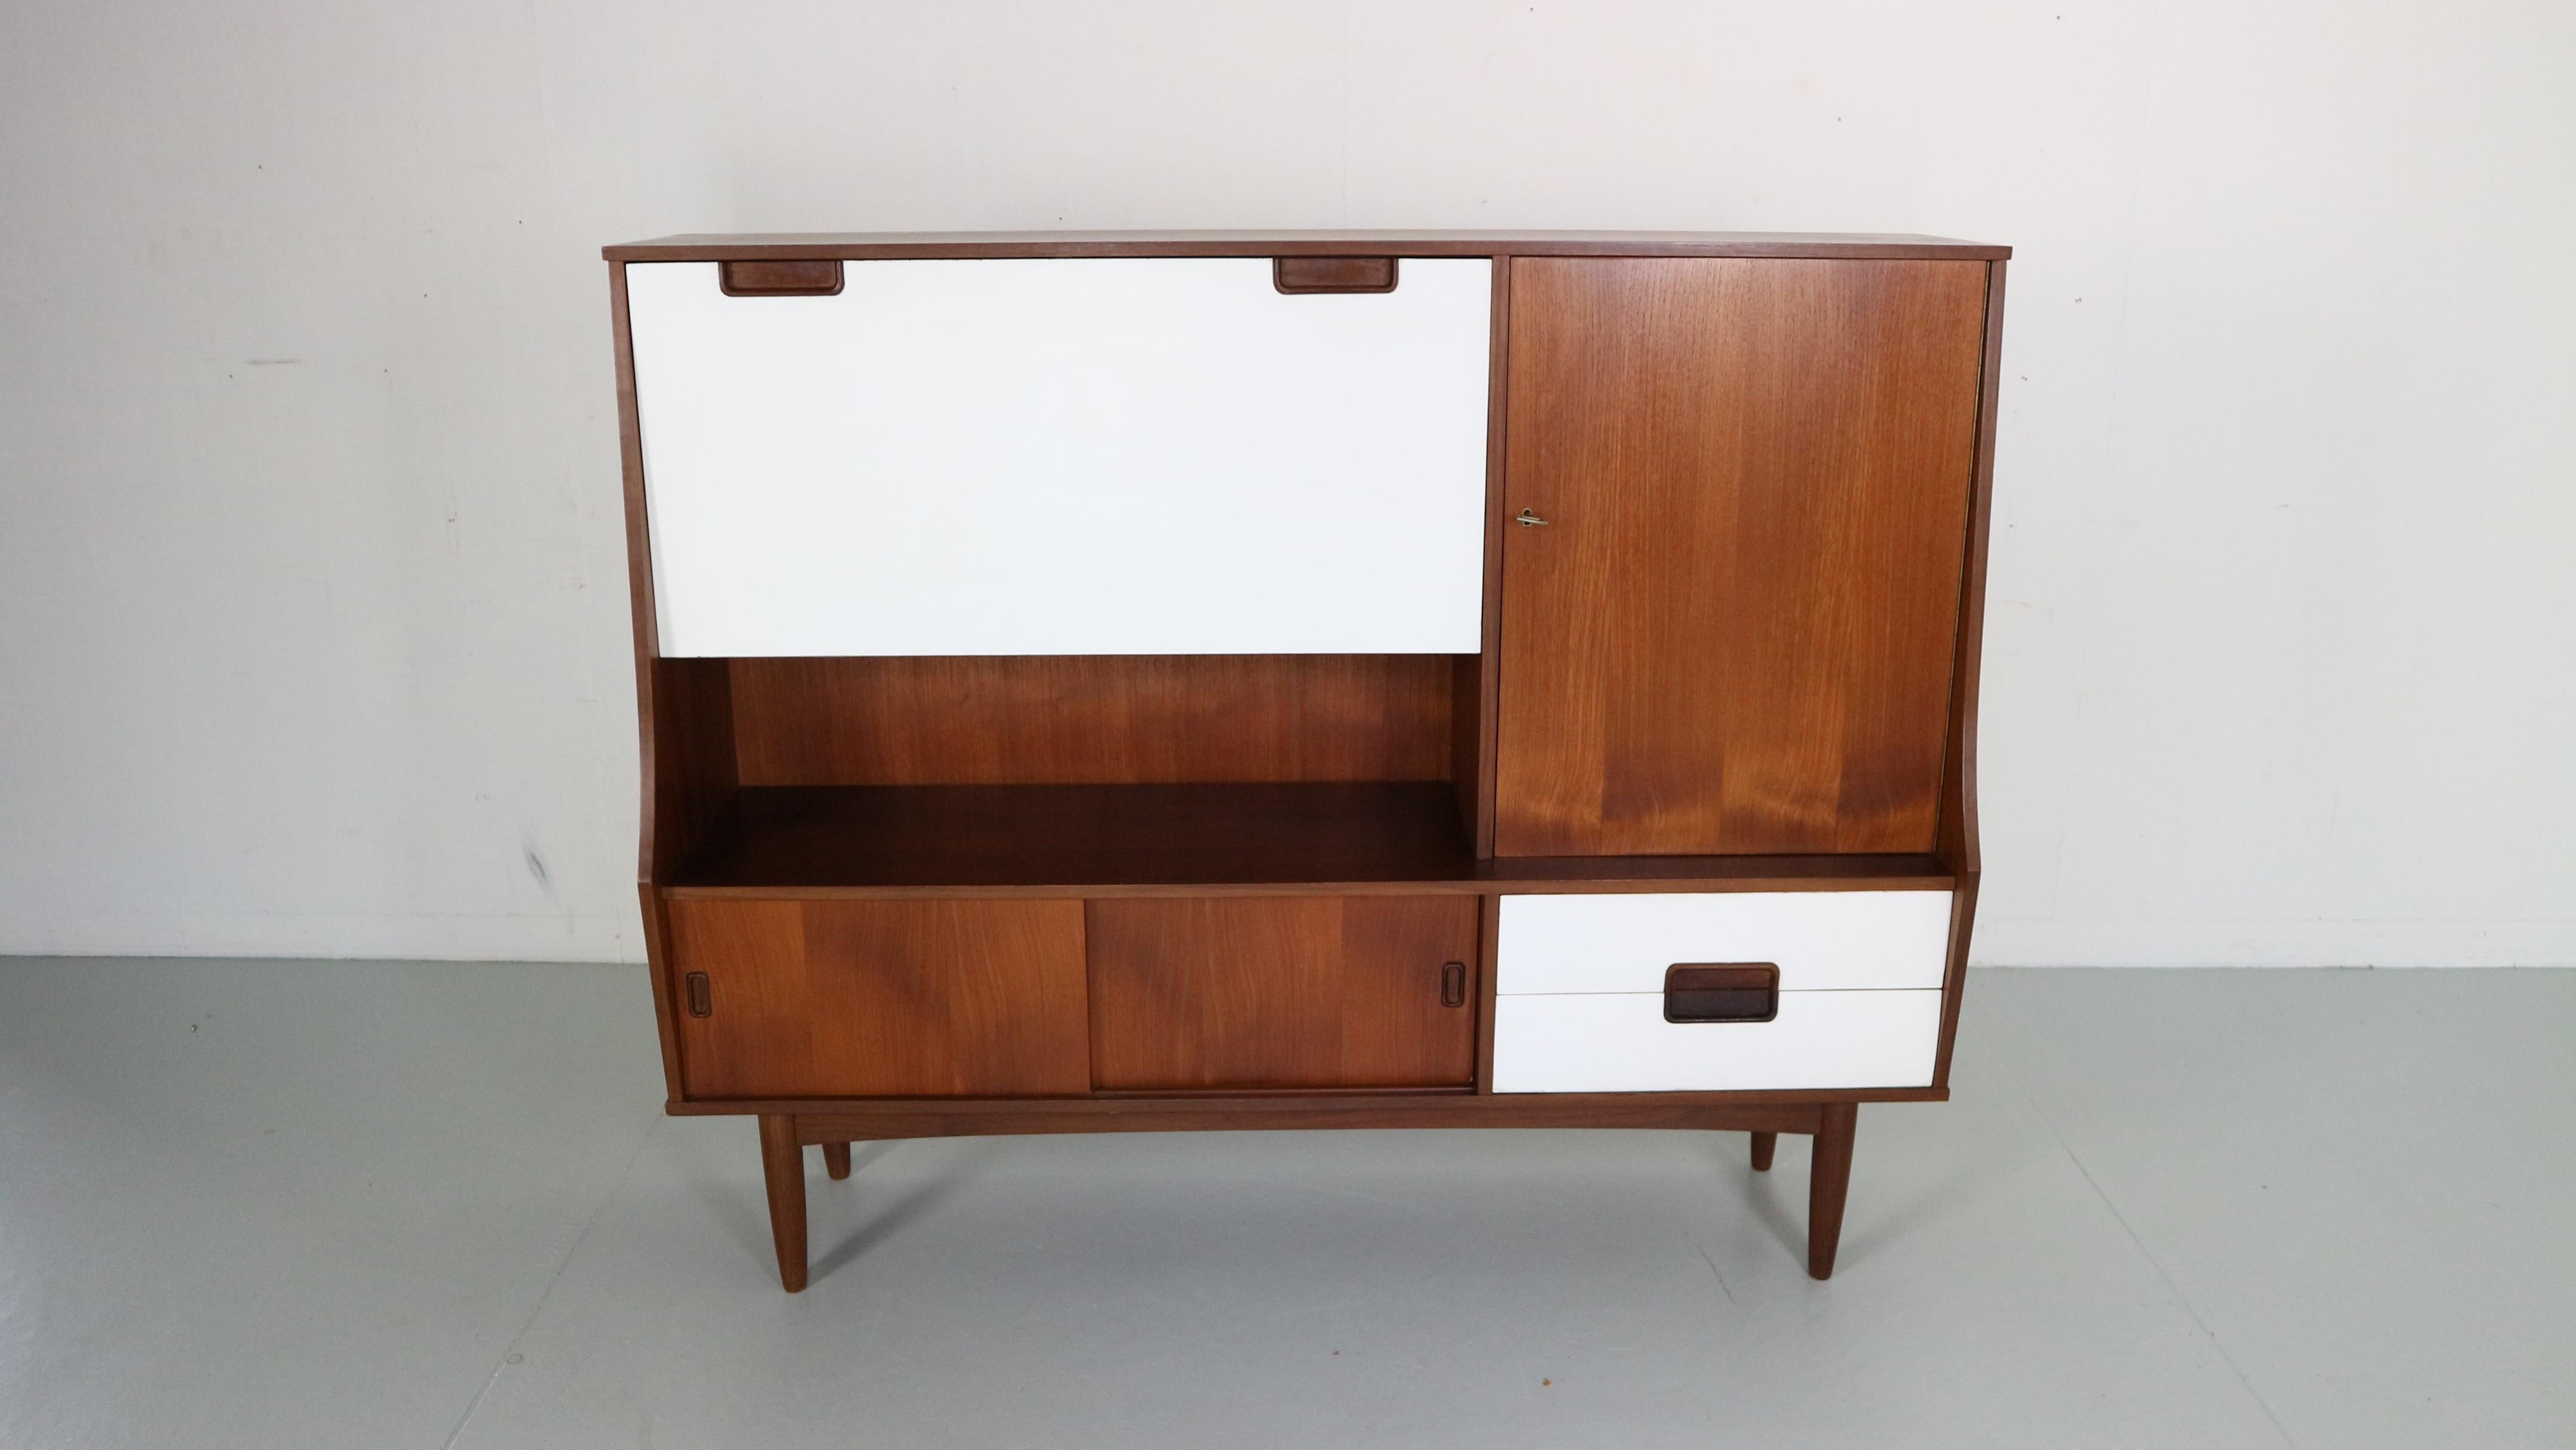 Mid- Century modern period buffet cabinet but also can be easily used as a secretary made in 1960's period, Denmark.

Teak cabinet with white formica details on the cabinets.
One working lock with the key.
Plenty of storage spaces from shelves to